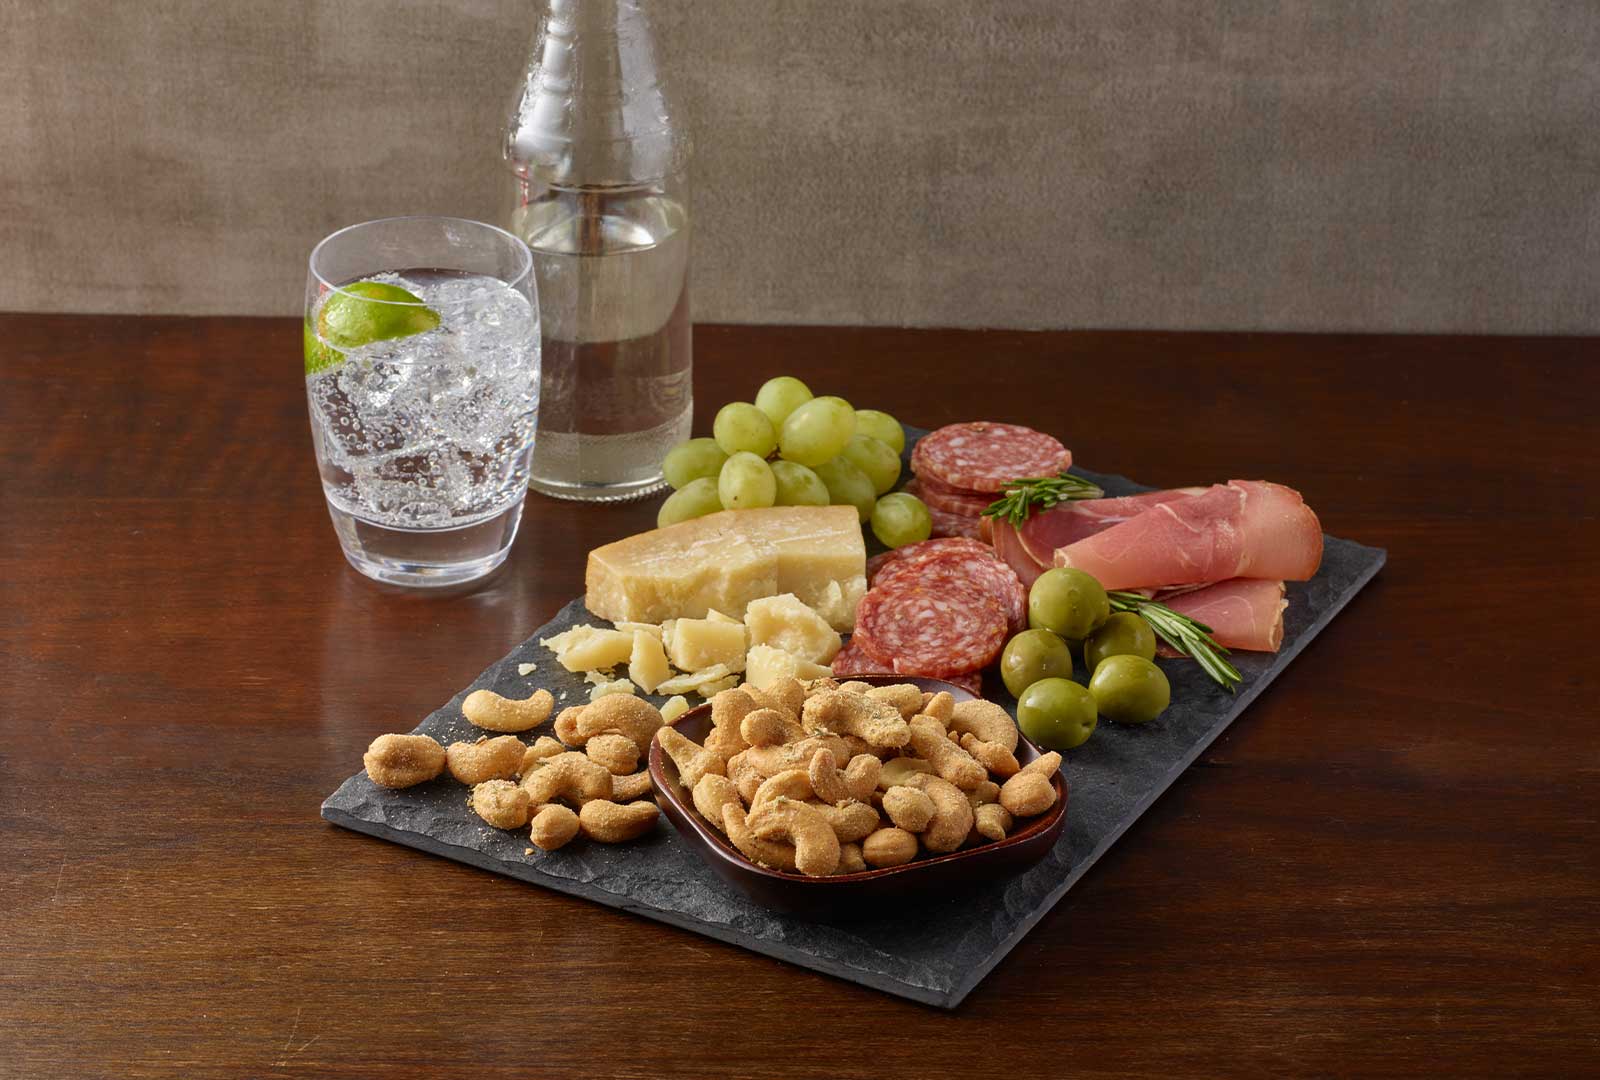 A charcuterie board featuring the new Planters Rosemary cashews